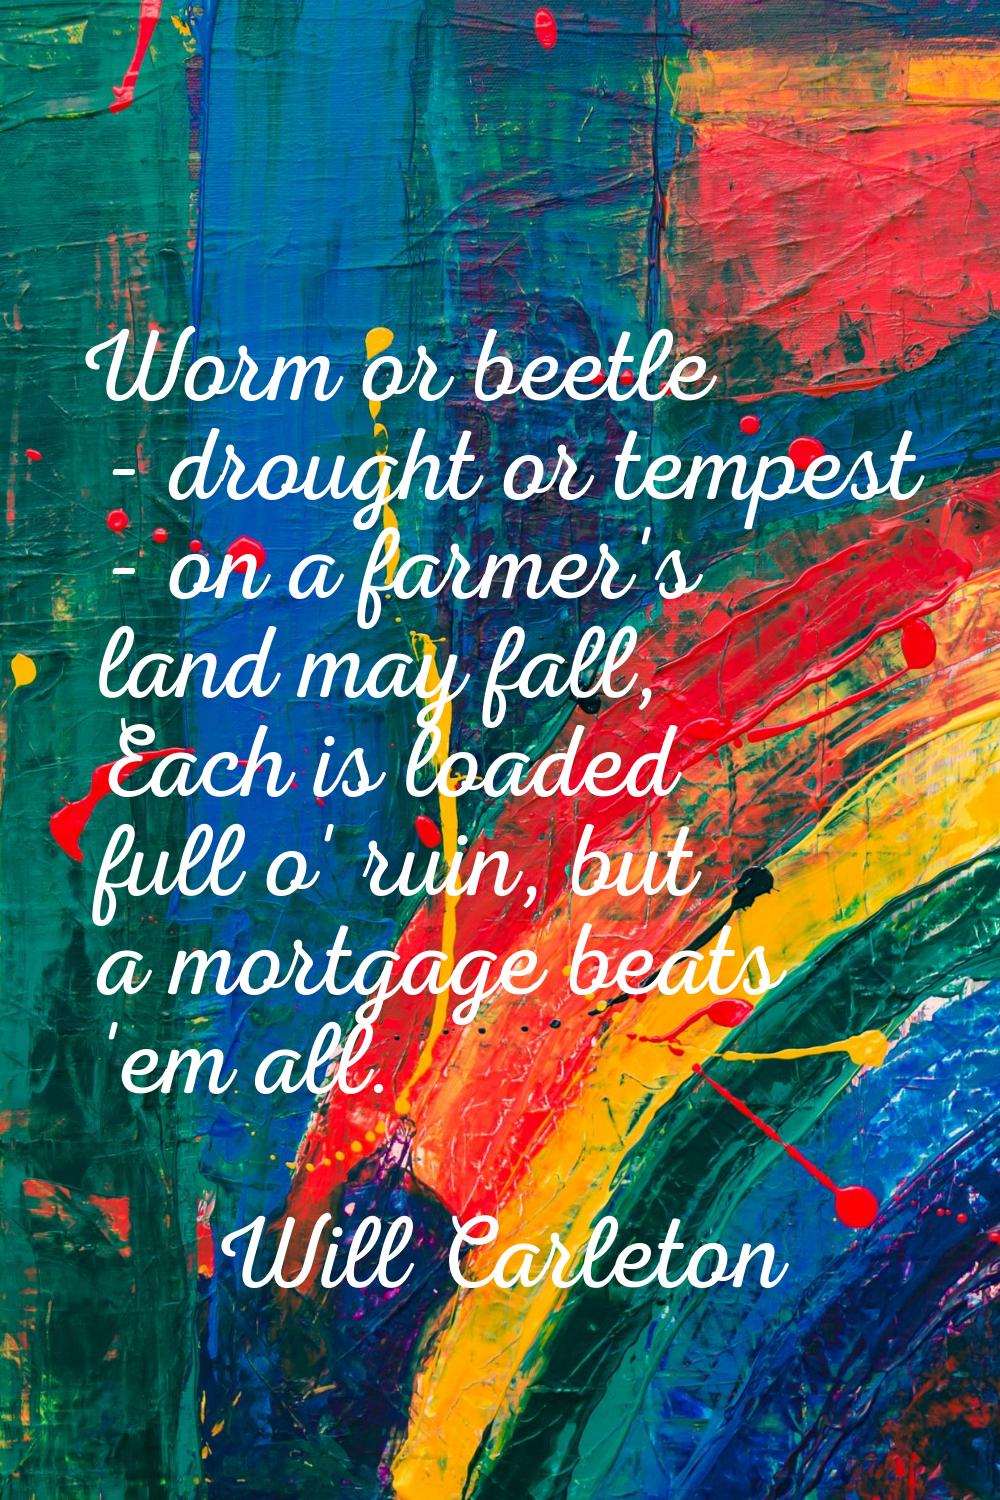 Worm or beetle - drought or tempest - on a farmer's land may fall, Each is loaded full o' ruin, but